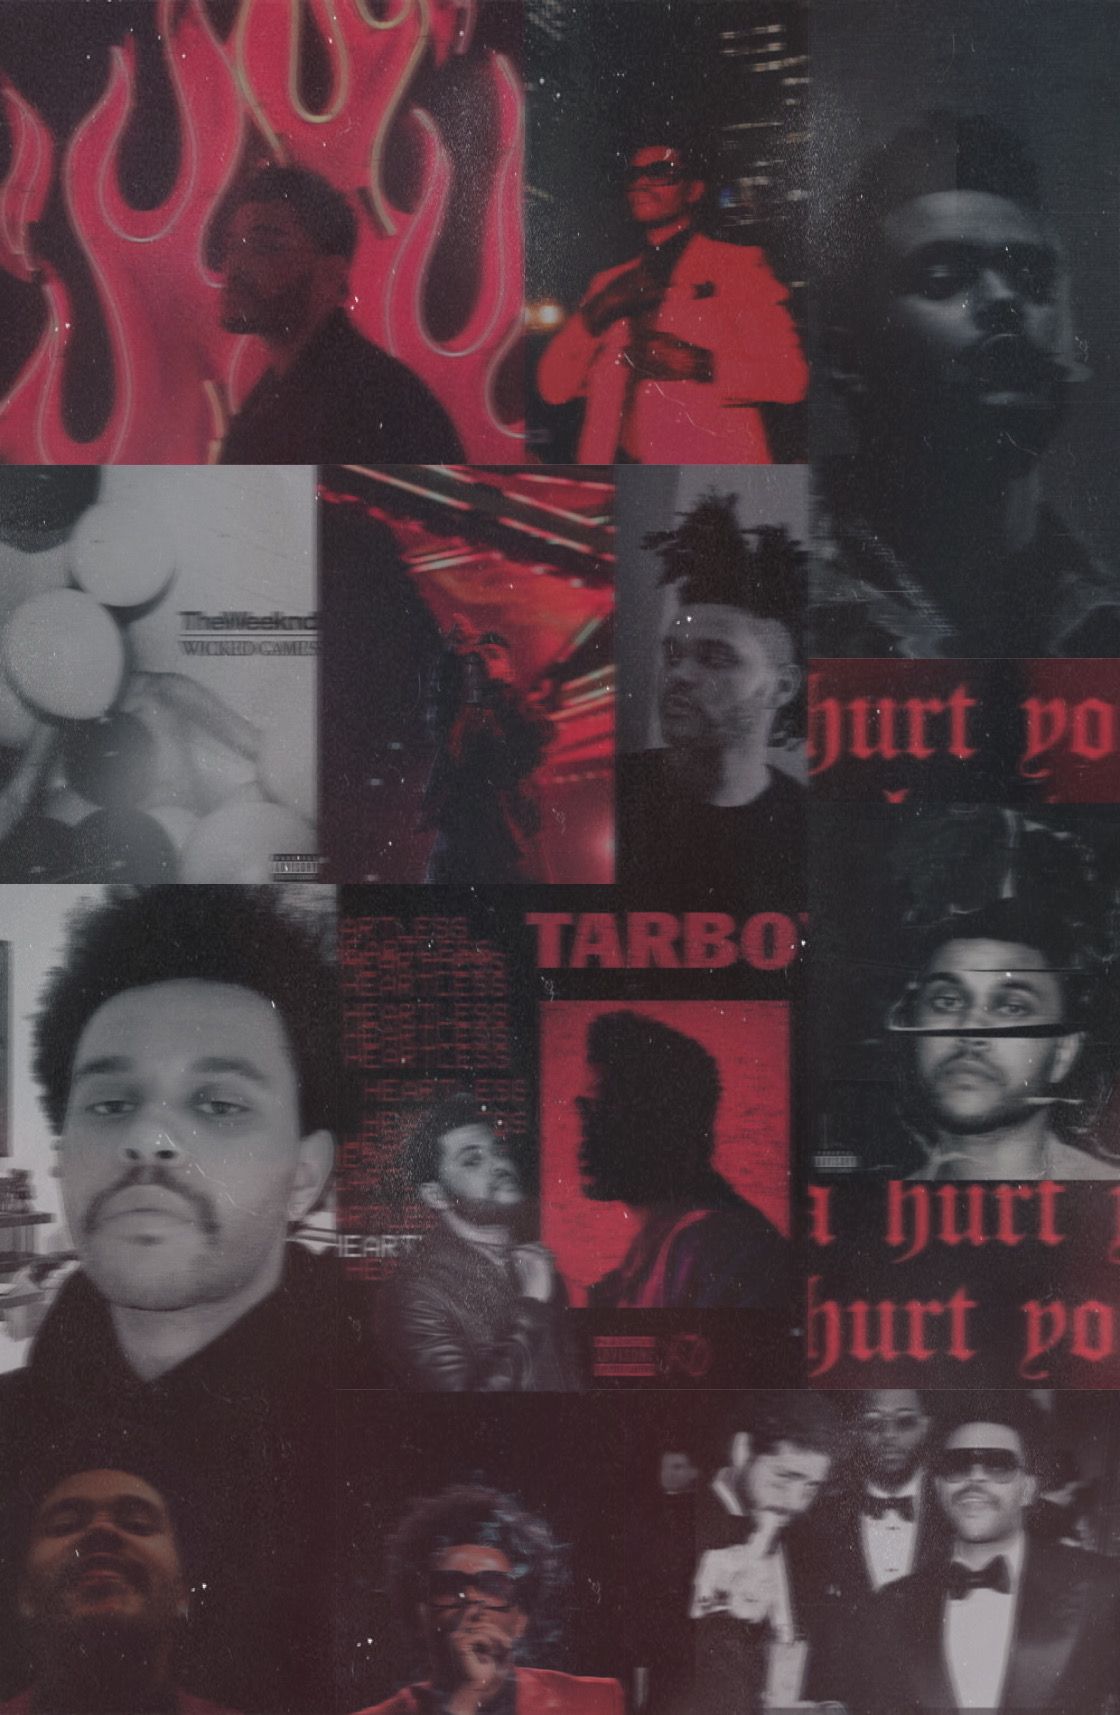 Red weeknd wallpaper. The weeknd poster, The weeknd background, The weeknd album cover